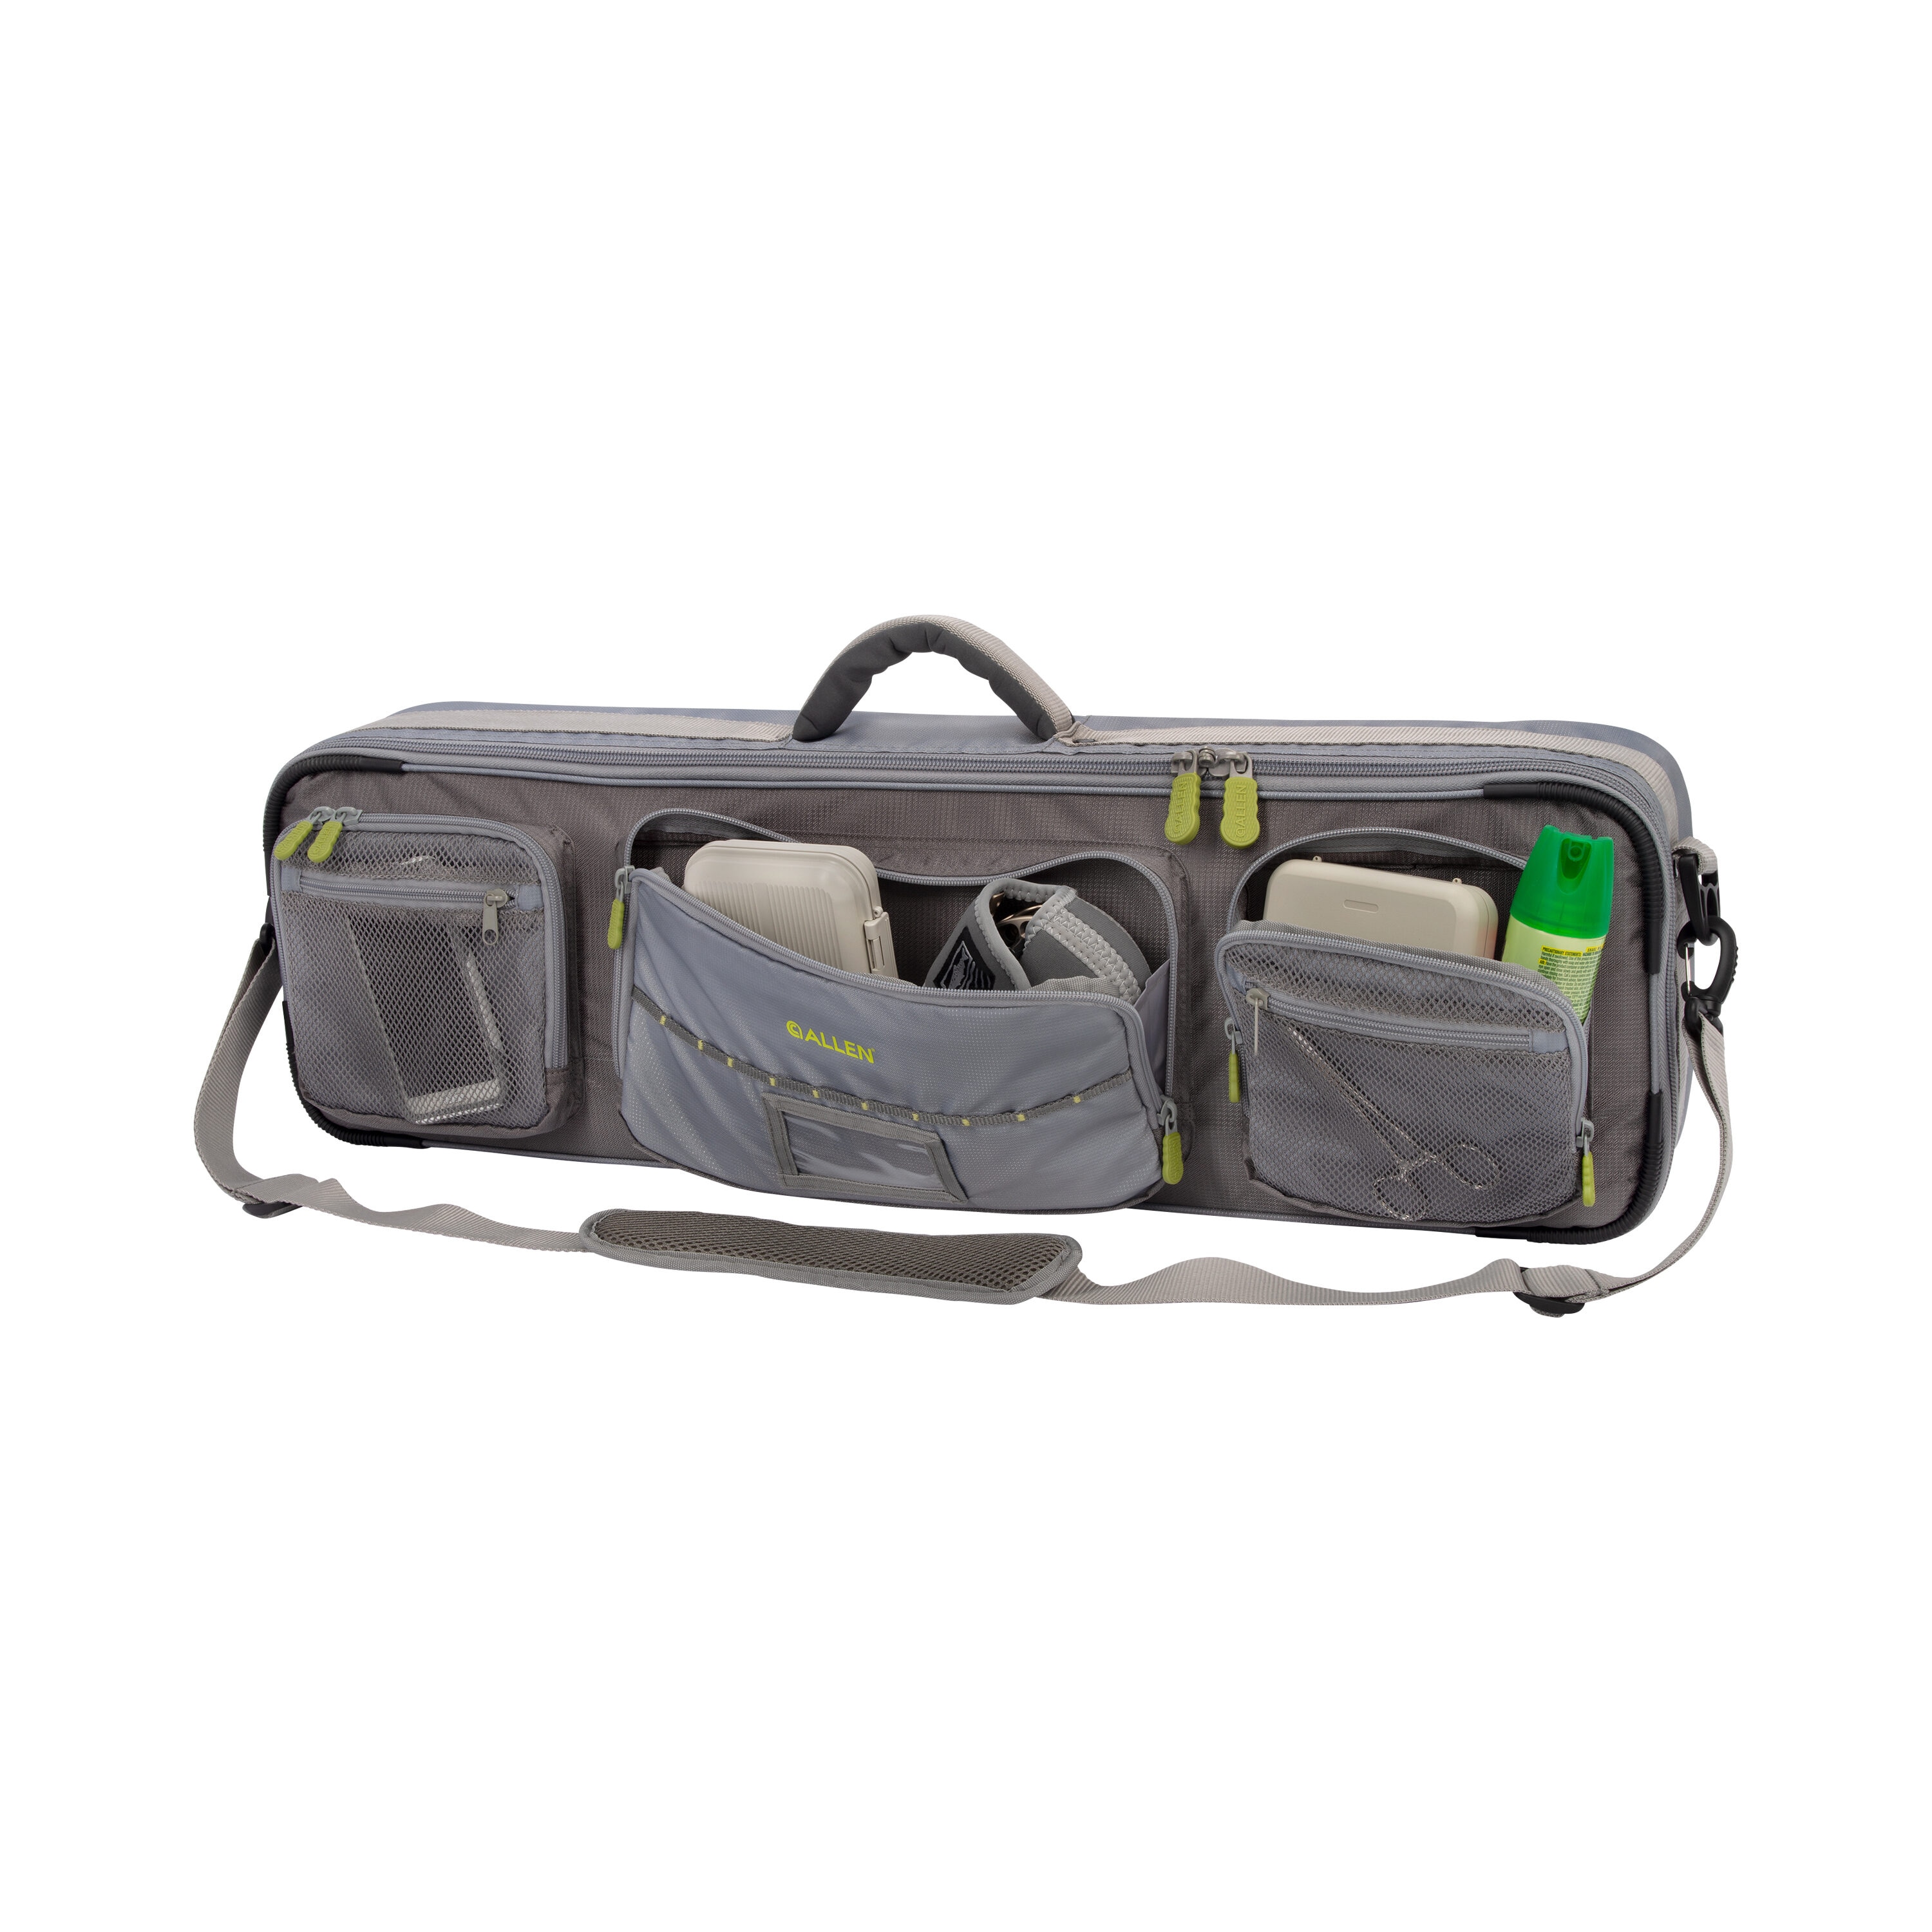  Fishing Rod Cases & Tubes - Plano / Fishing Rod Cases & Tubes / Fishing  Rods & A: Sports & Outdoors